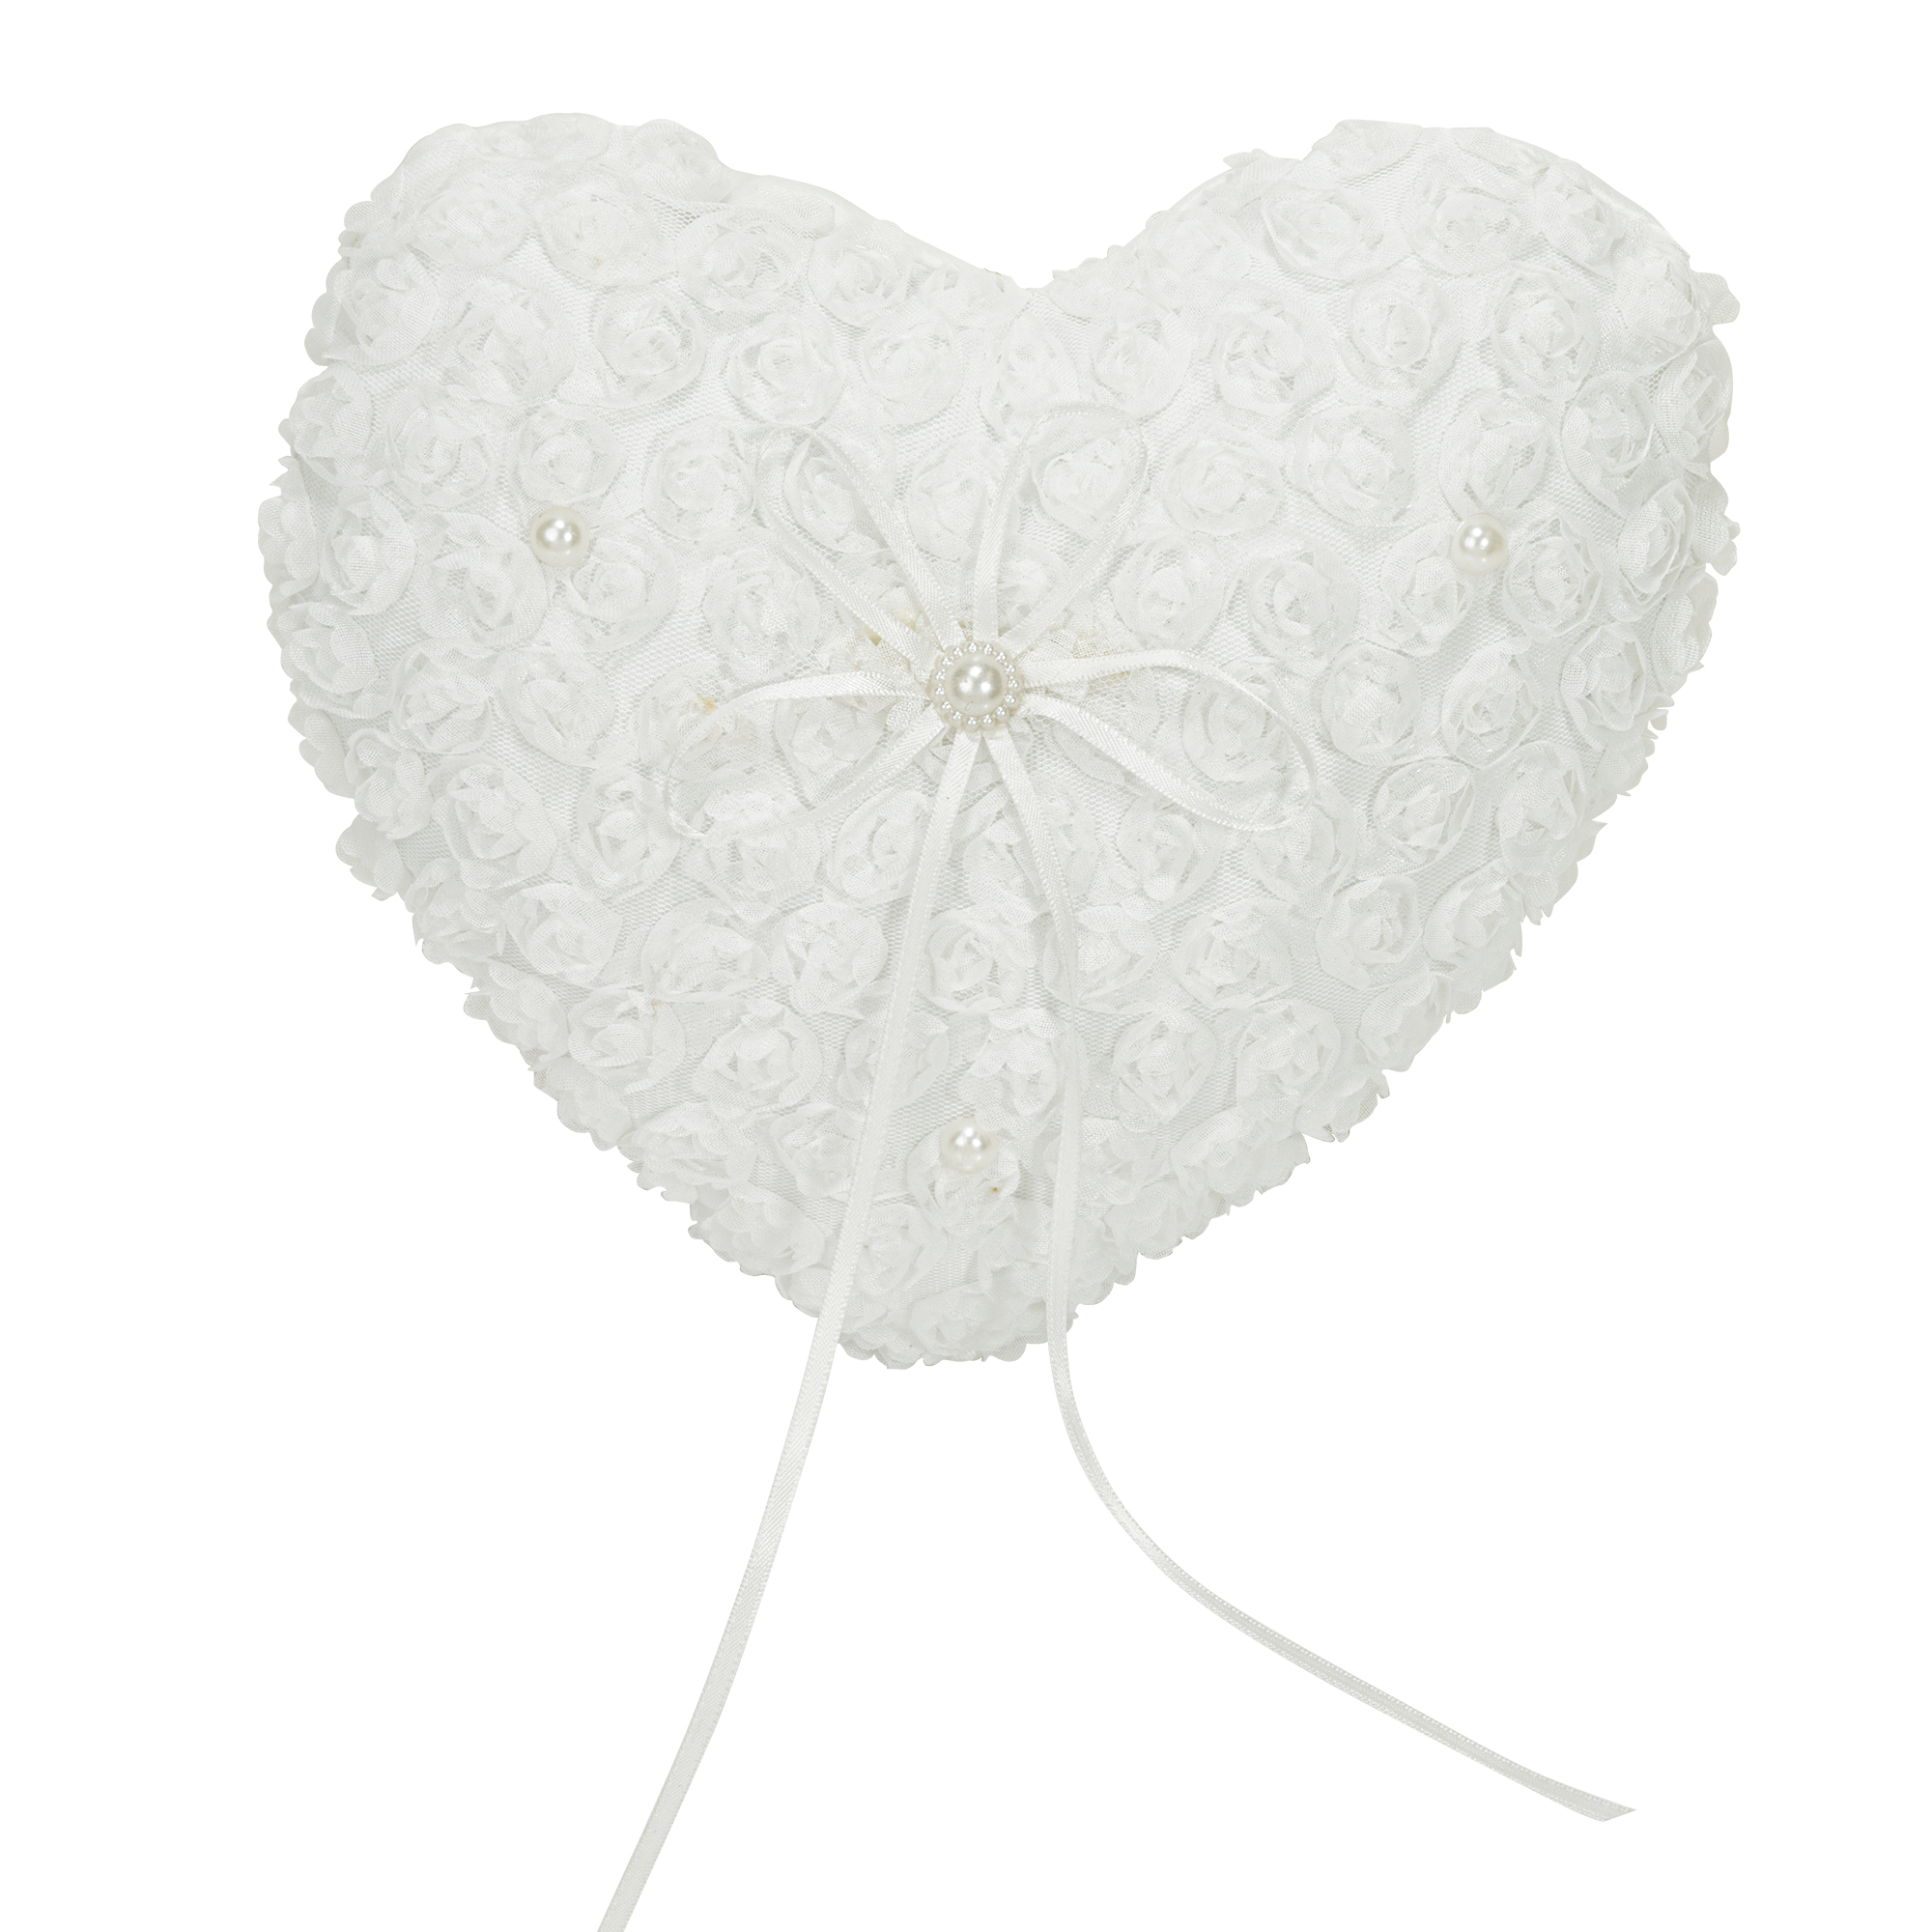 Heart Wedding Pillow with Pearl Accent - White